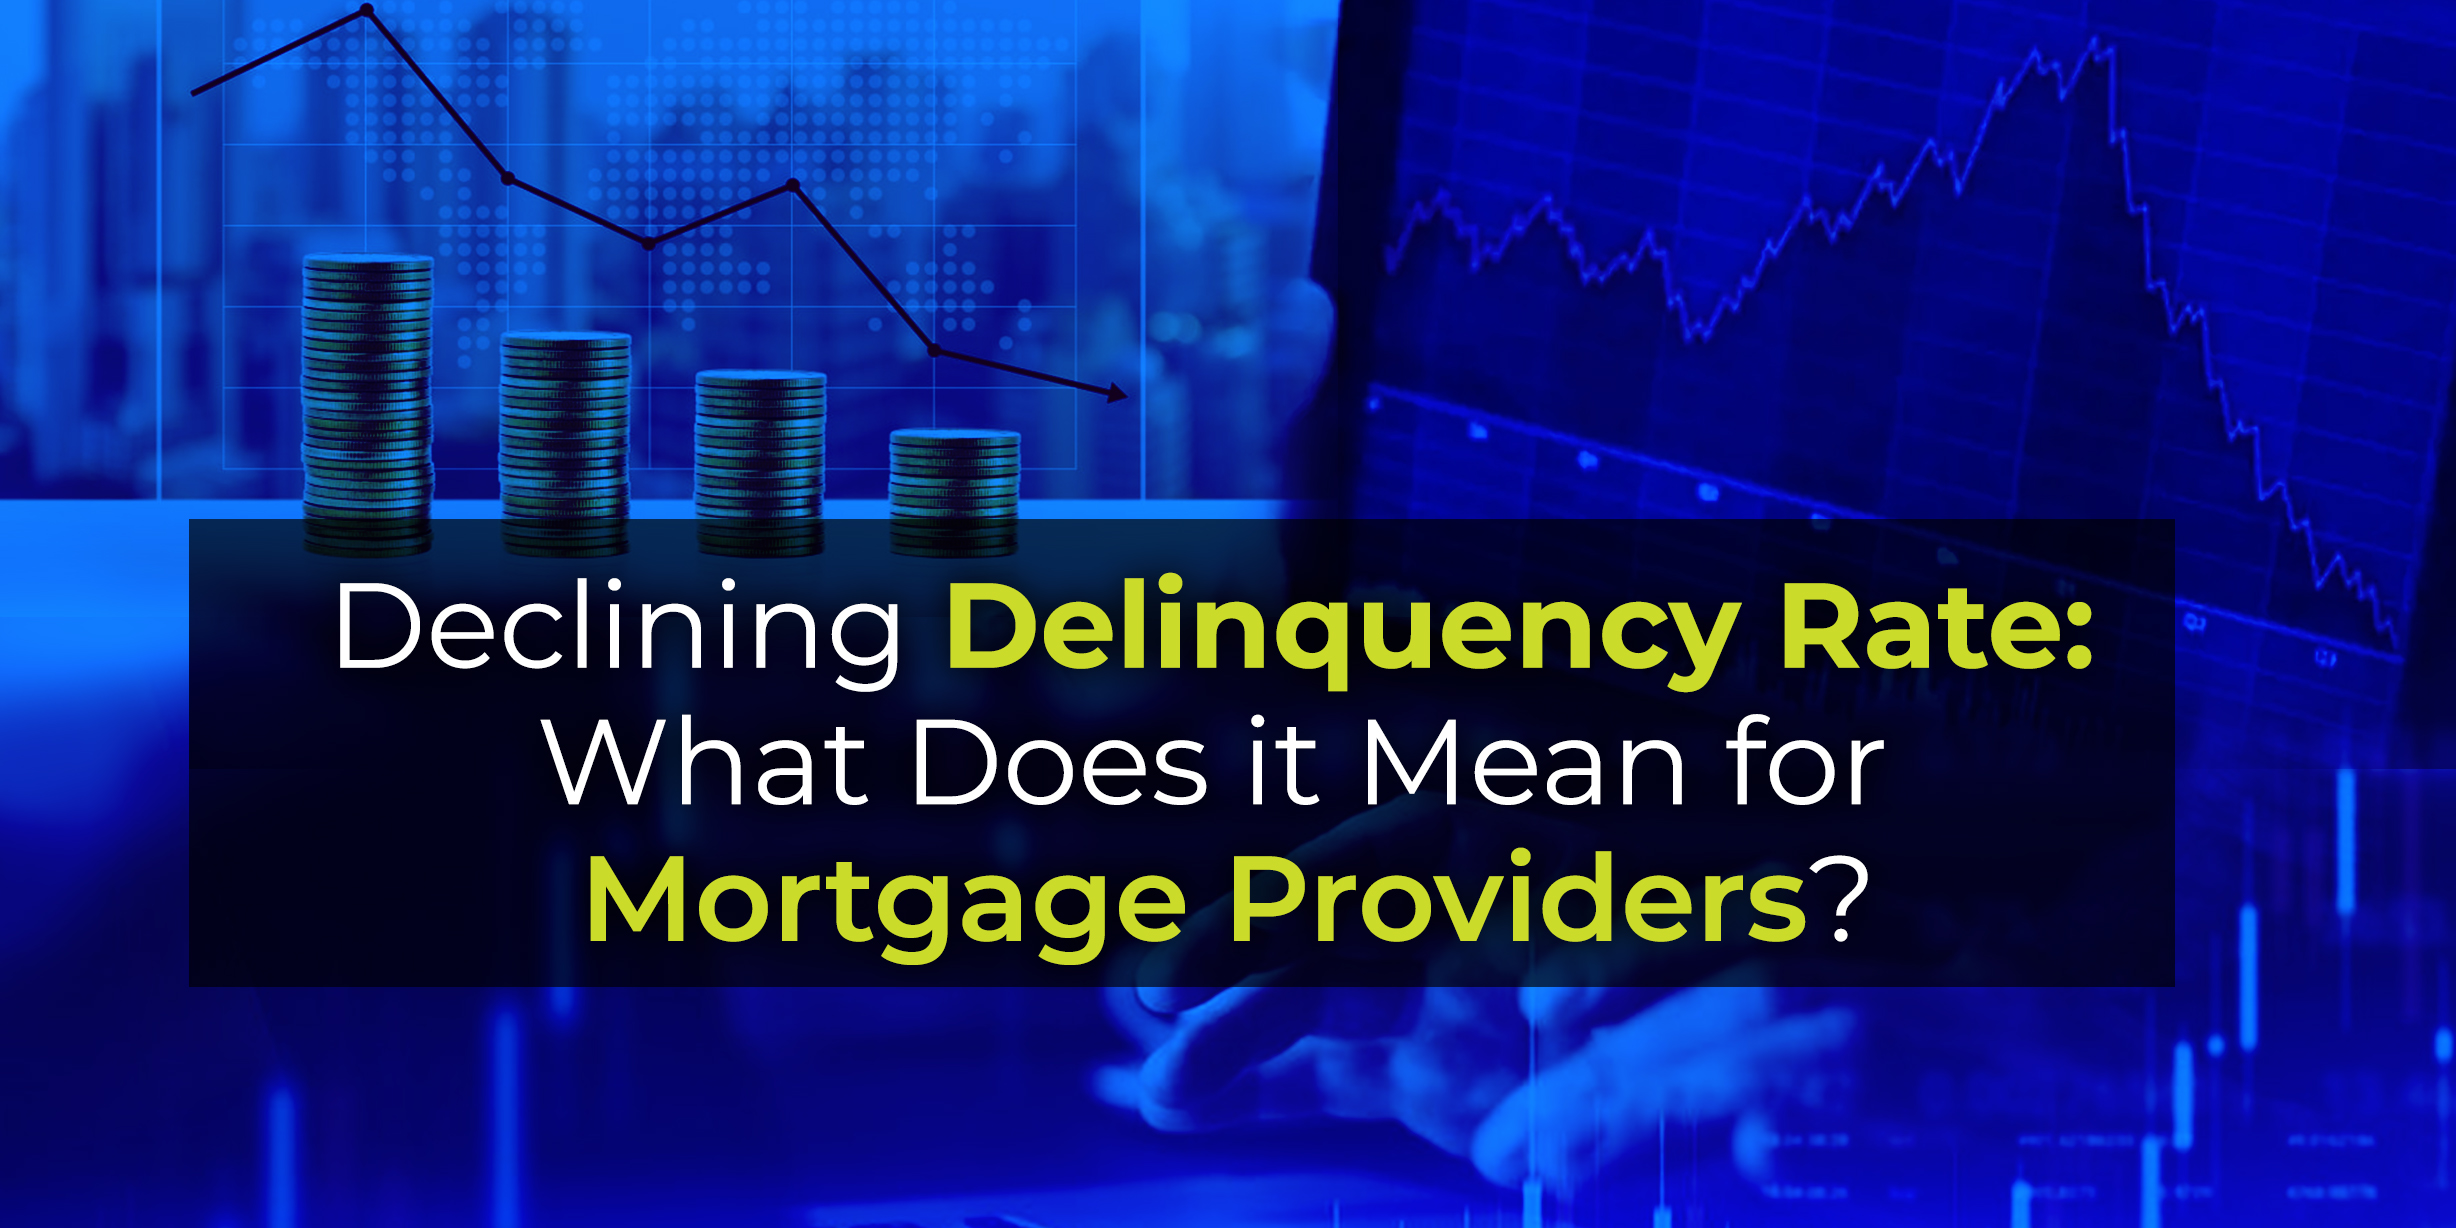 Declining Delinquency Rate: What Does it Mean for Mortgage Providers?